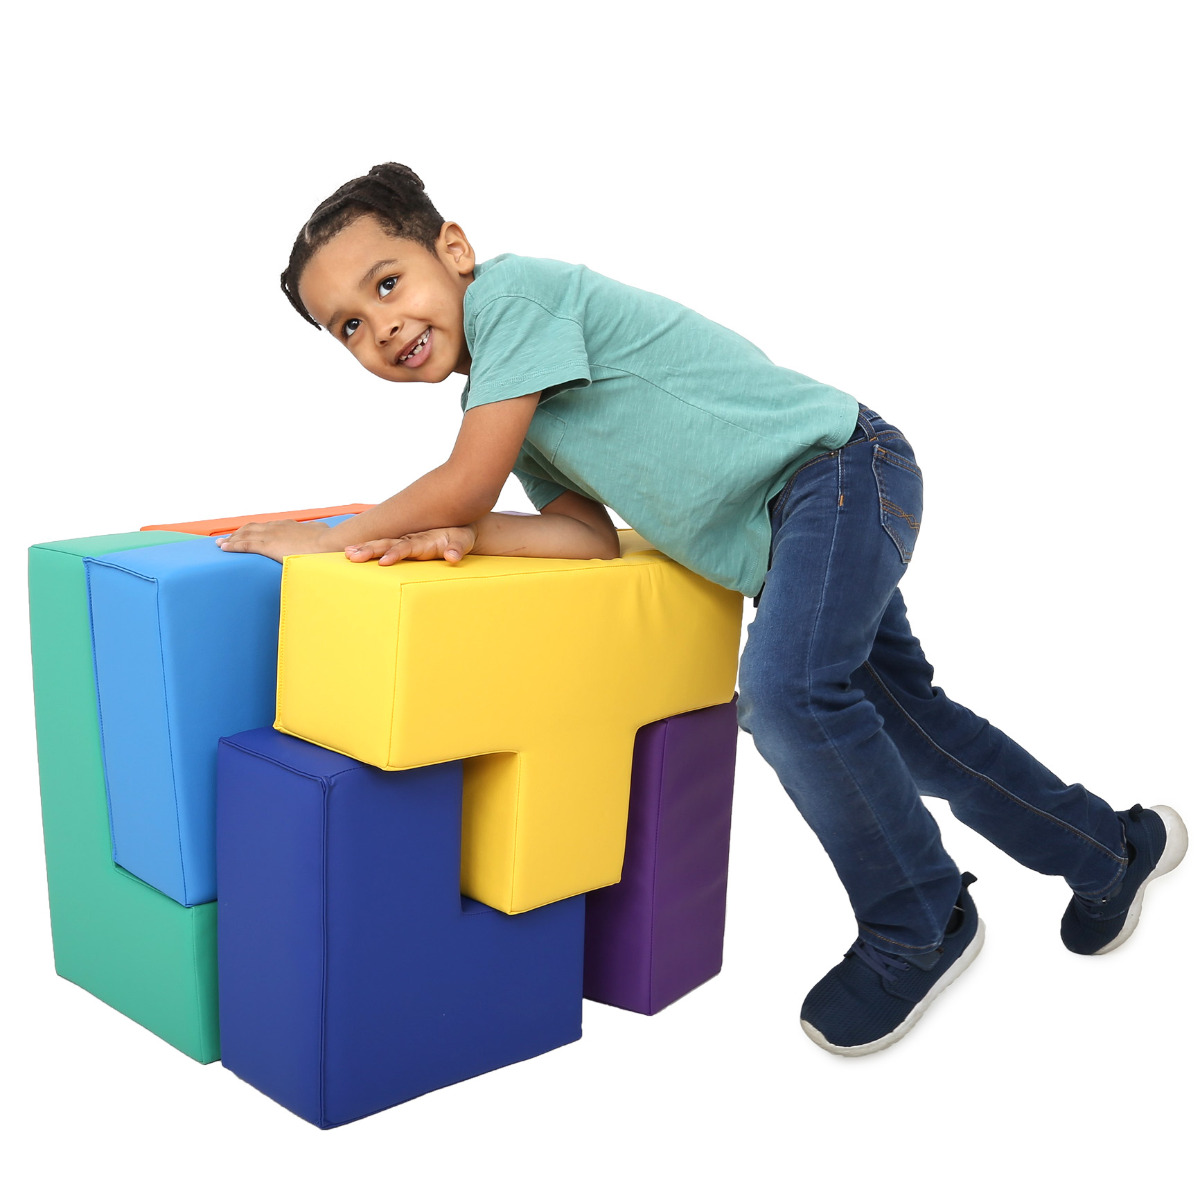 June_24_-_The_Value_of_Practicing_Occupational_Therapy_Skills_at_Home_puzzle_cube